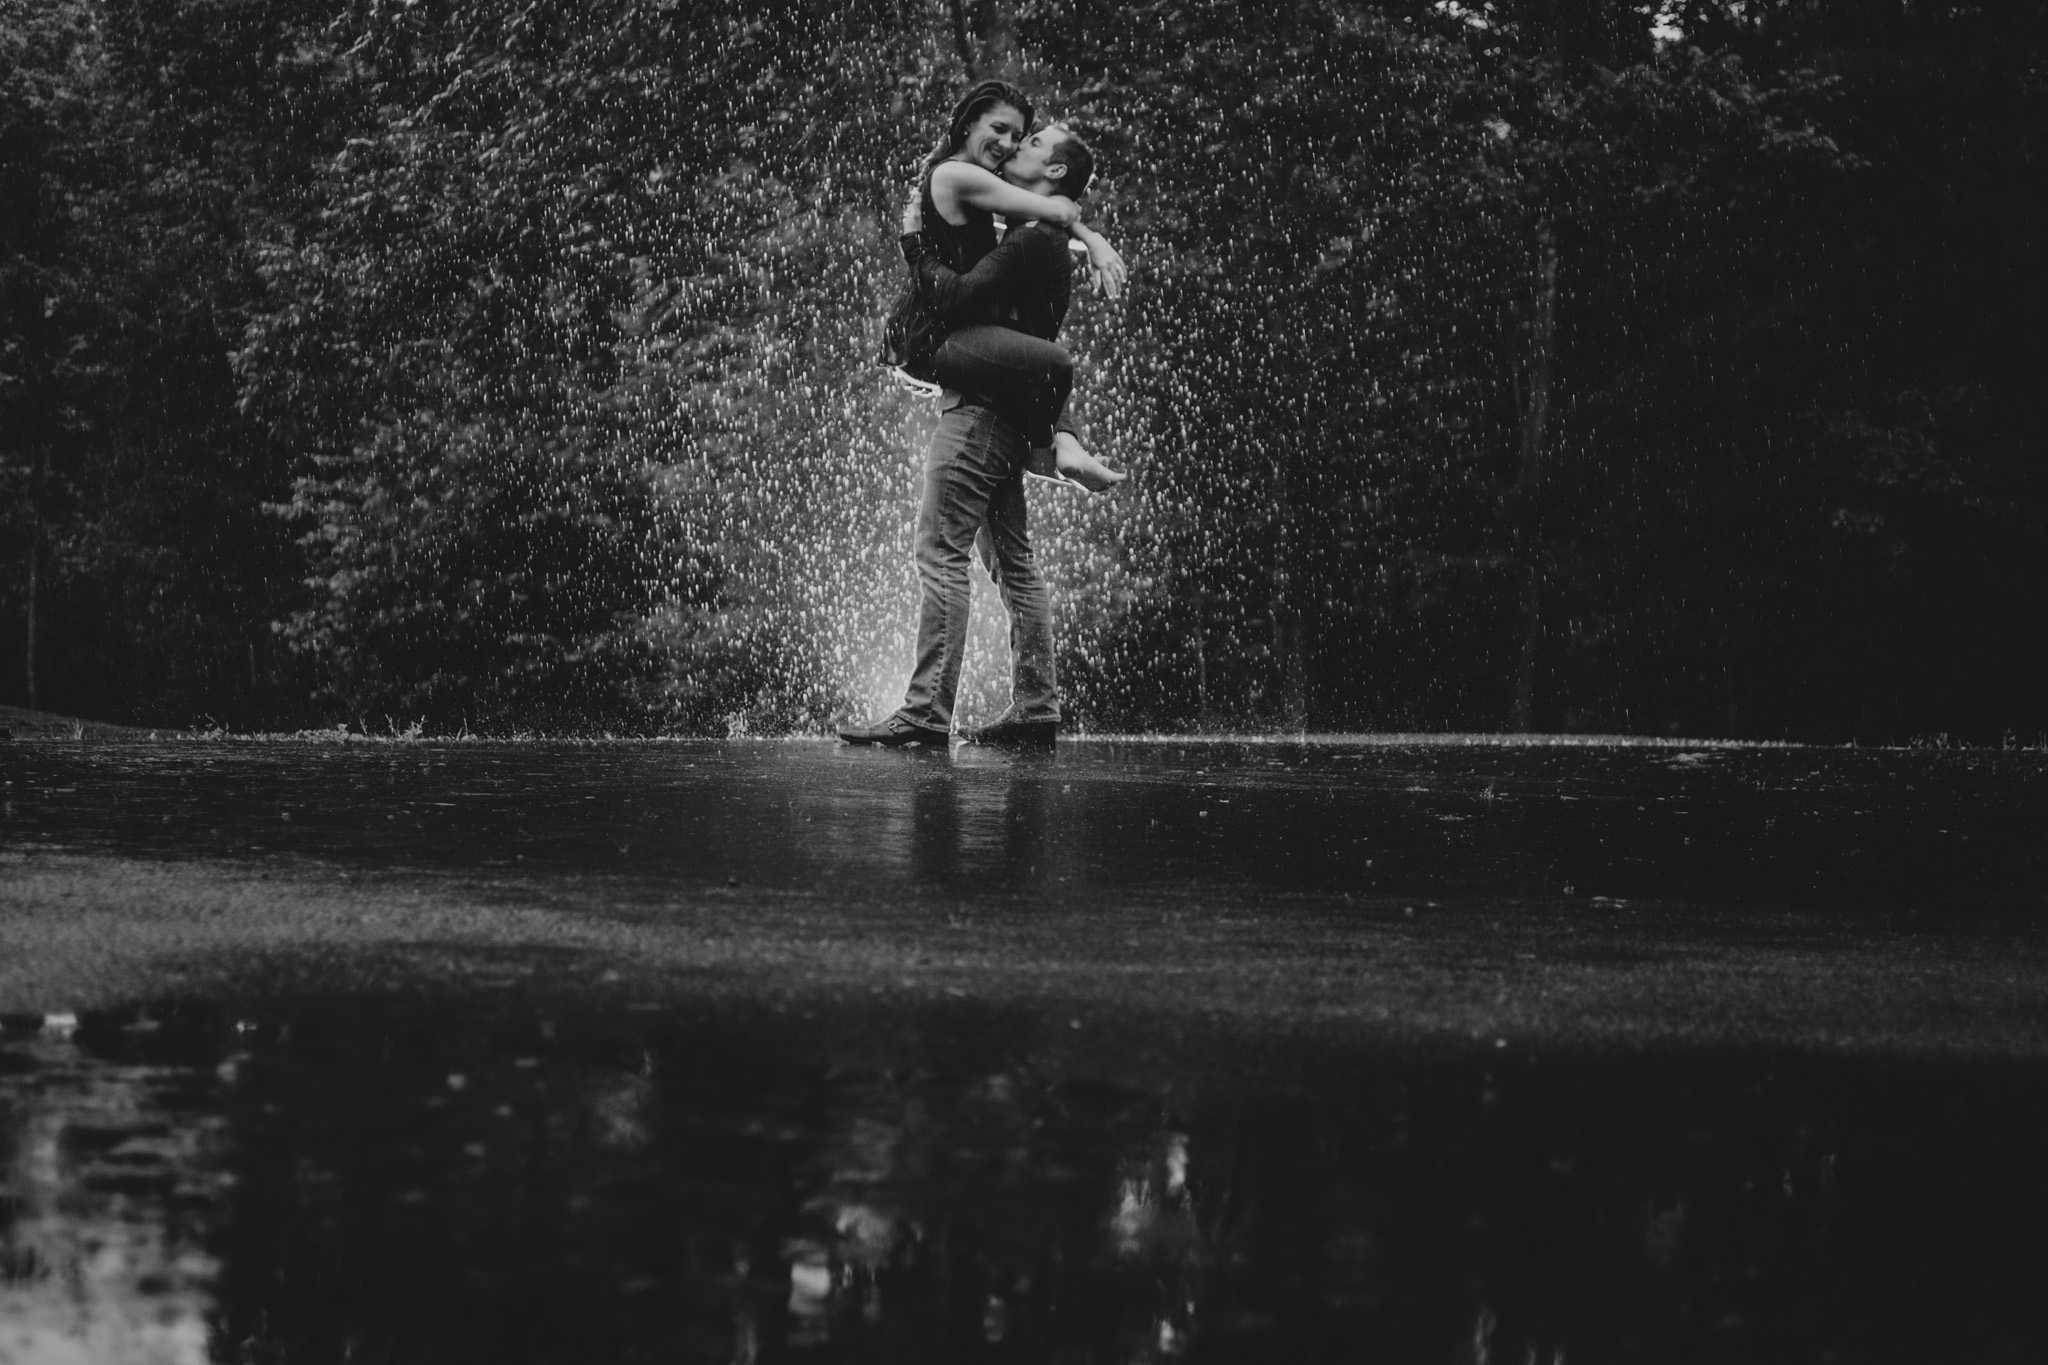 Wet hugs in the rain during a Charlotte, NC anniversary photo shoot